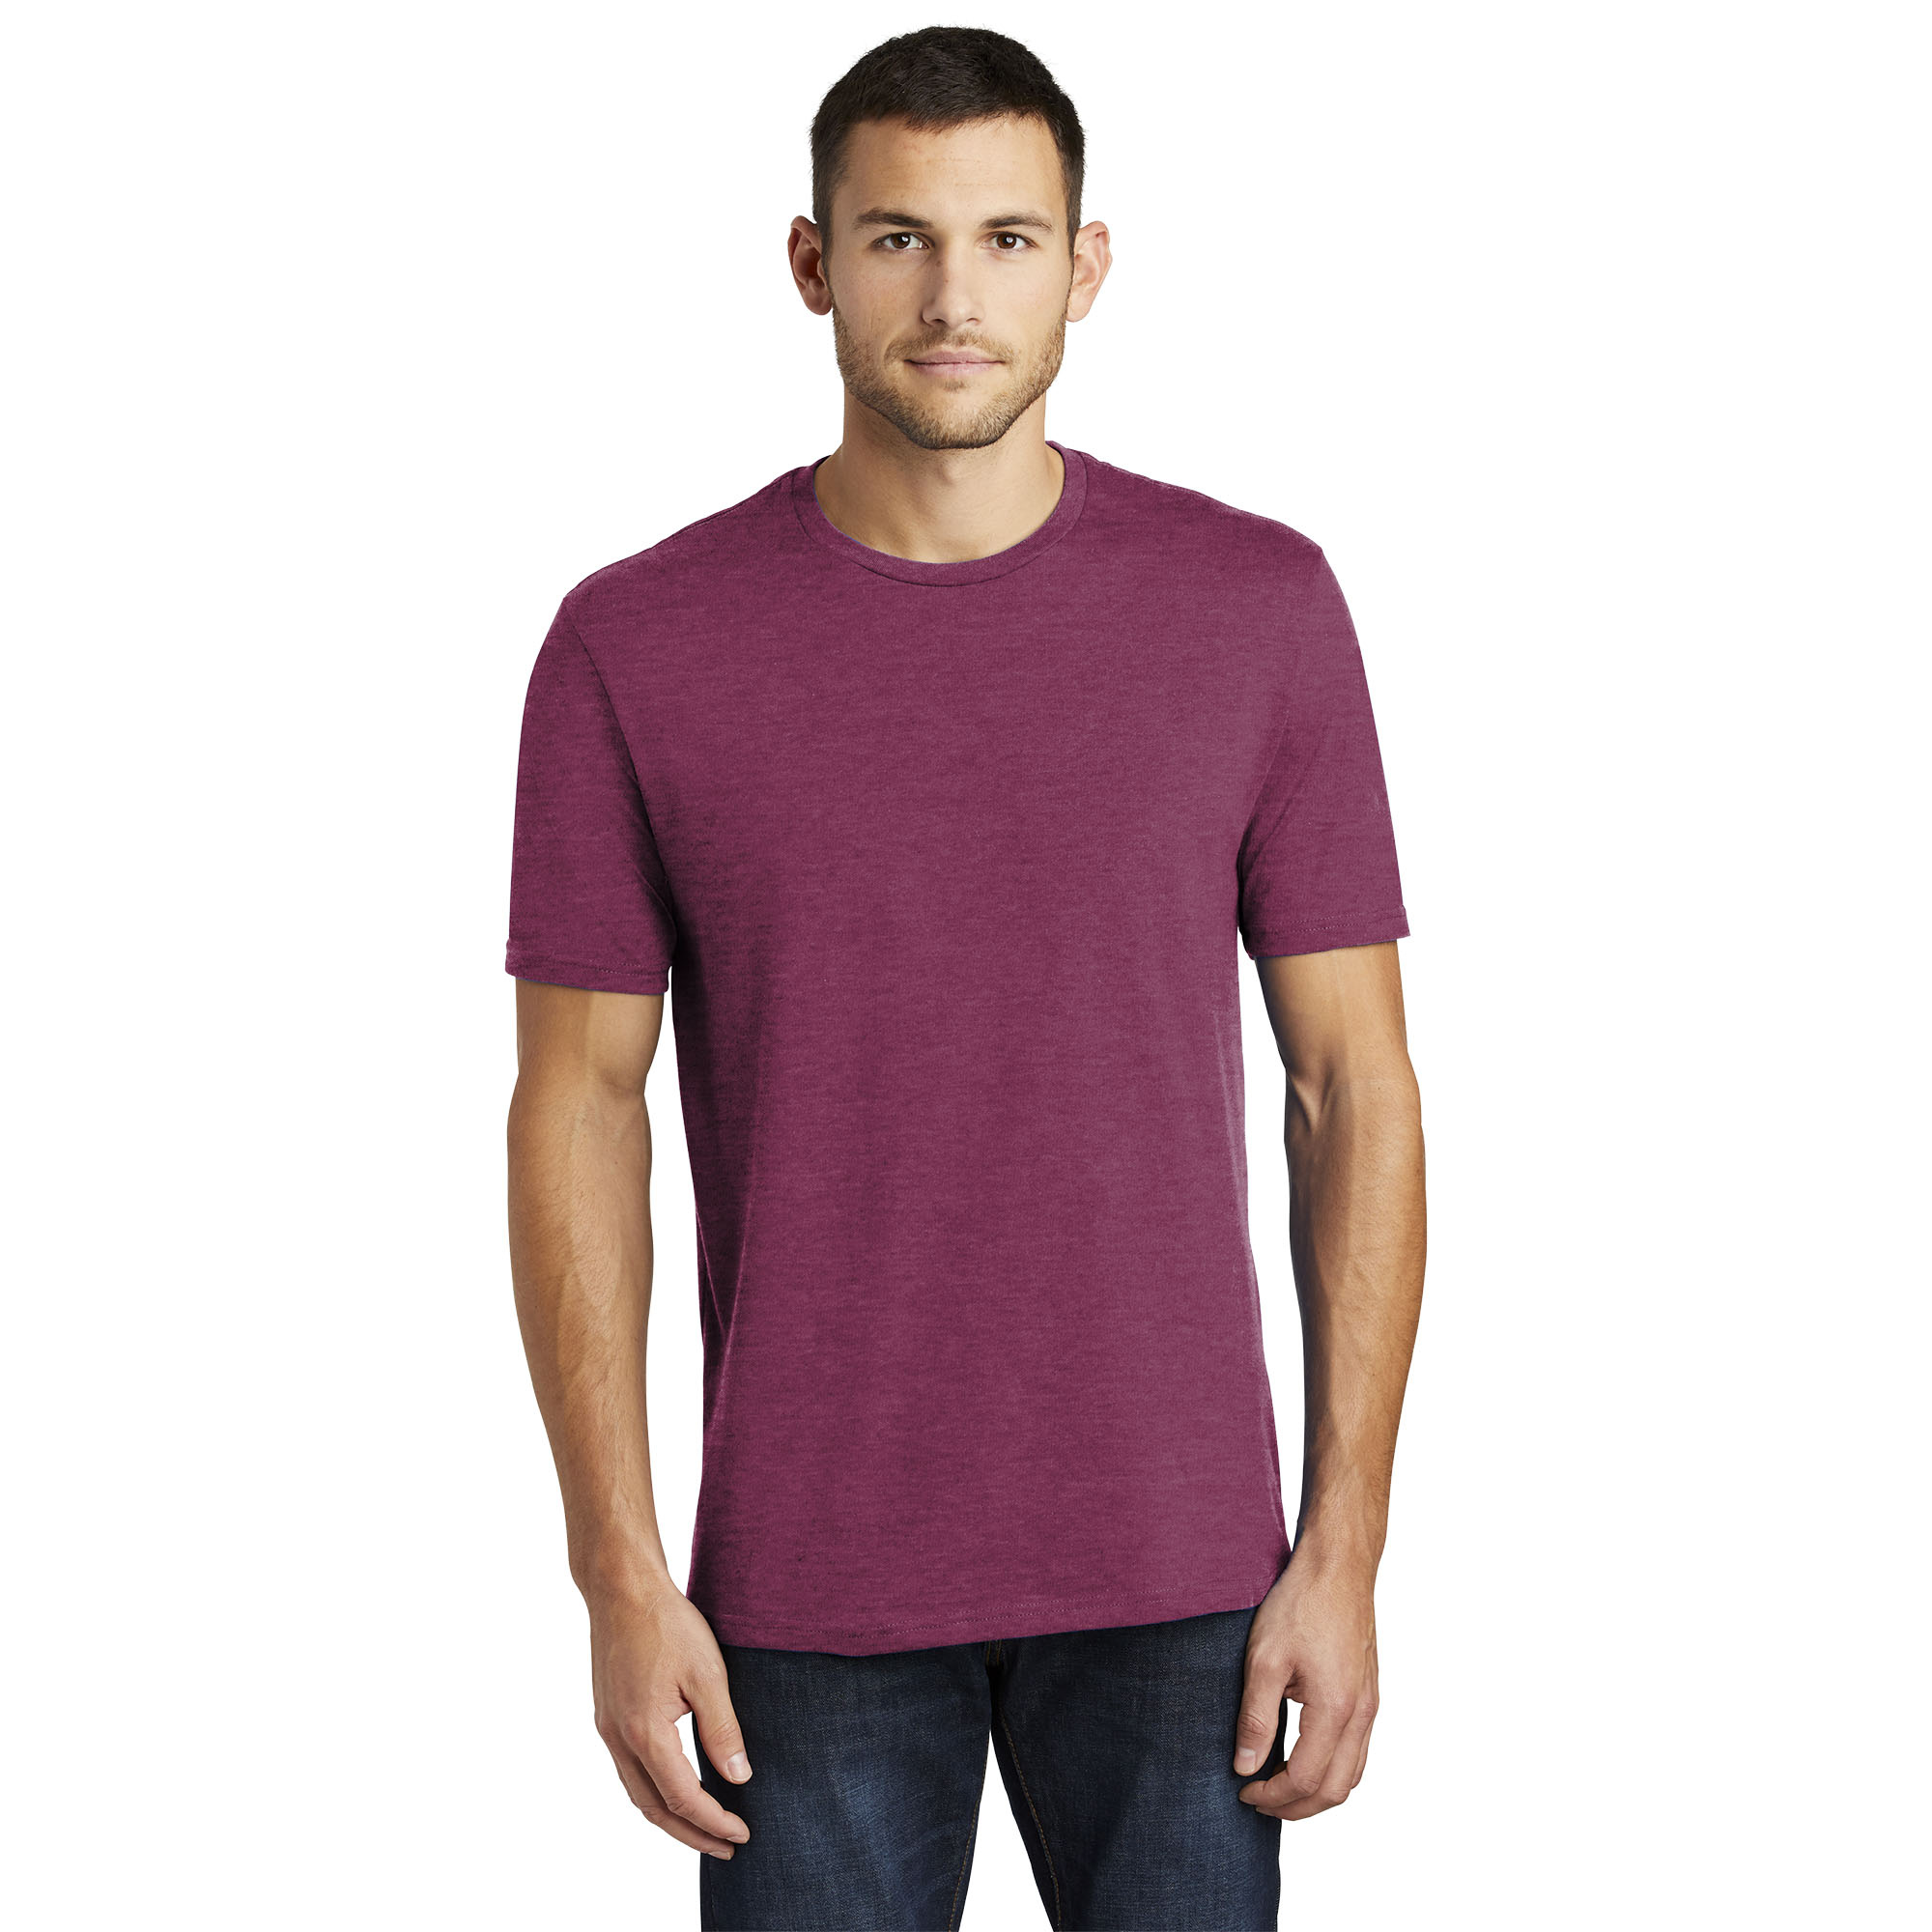 District DT104 Perfect Weight Tee - Heathered Loganberry | Full Source